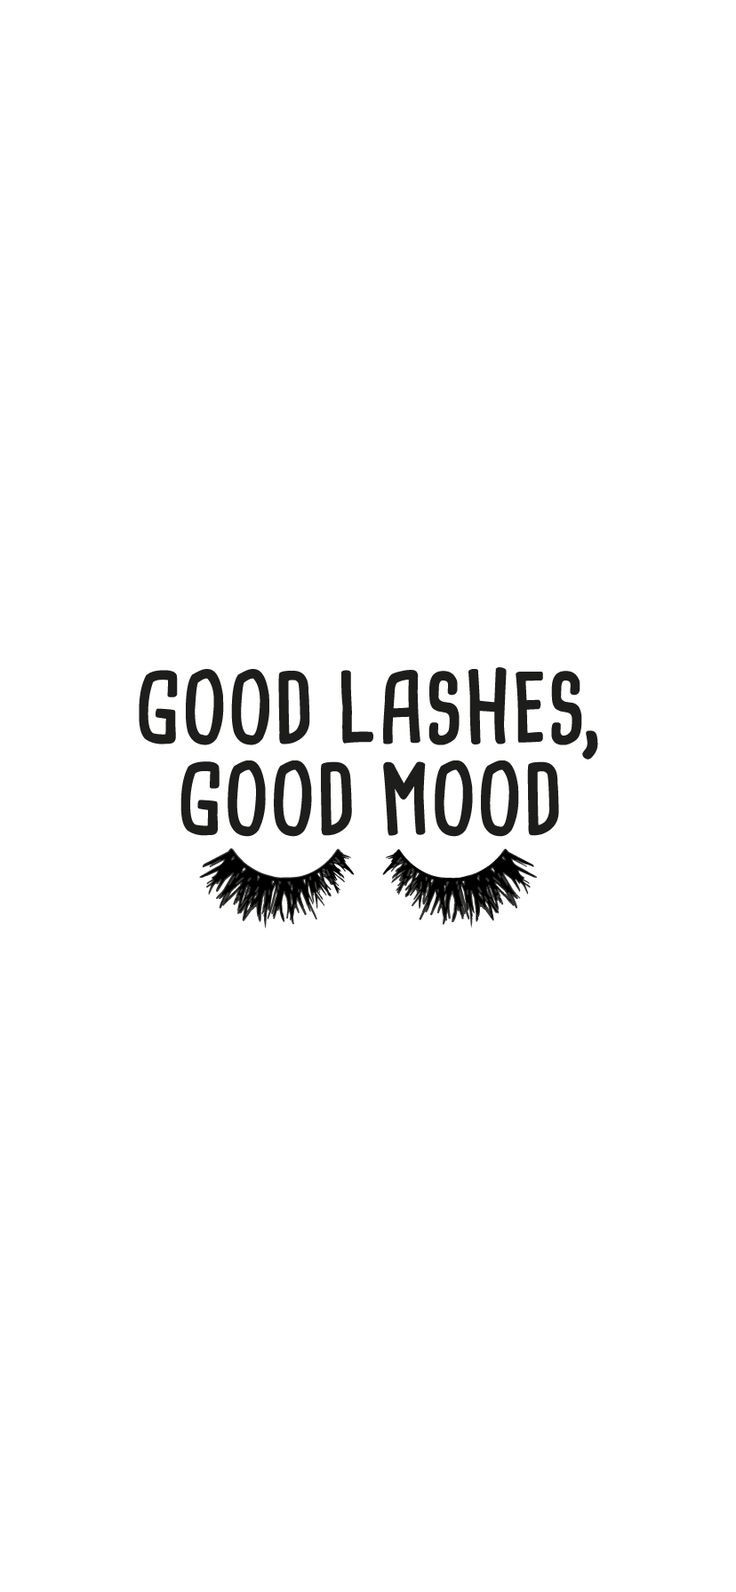 Good Lashes Good Temper Quote. iPhone XR Wallpaper Background. Best lashes, Good mood quotes, Lash quotes